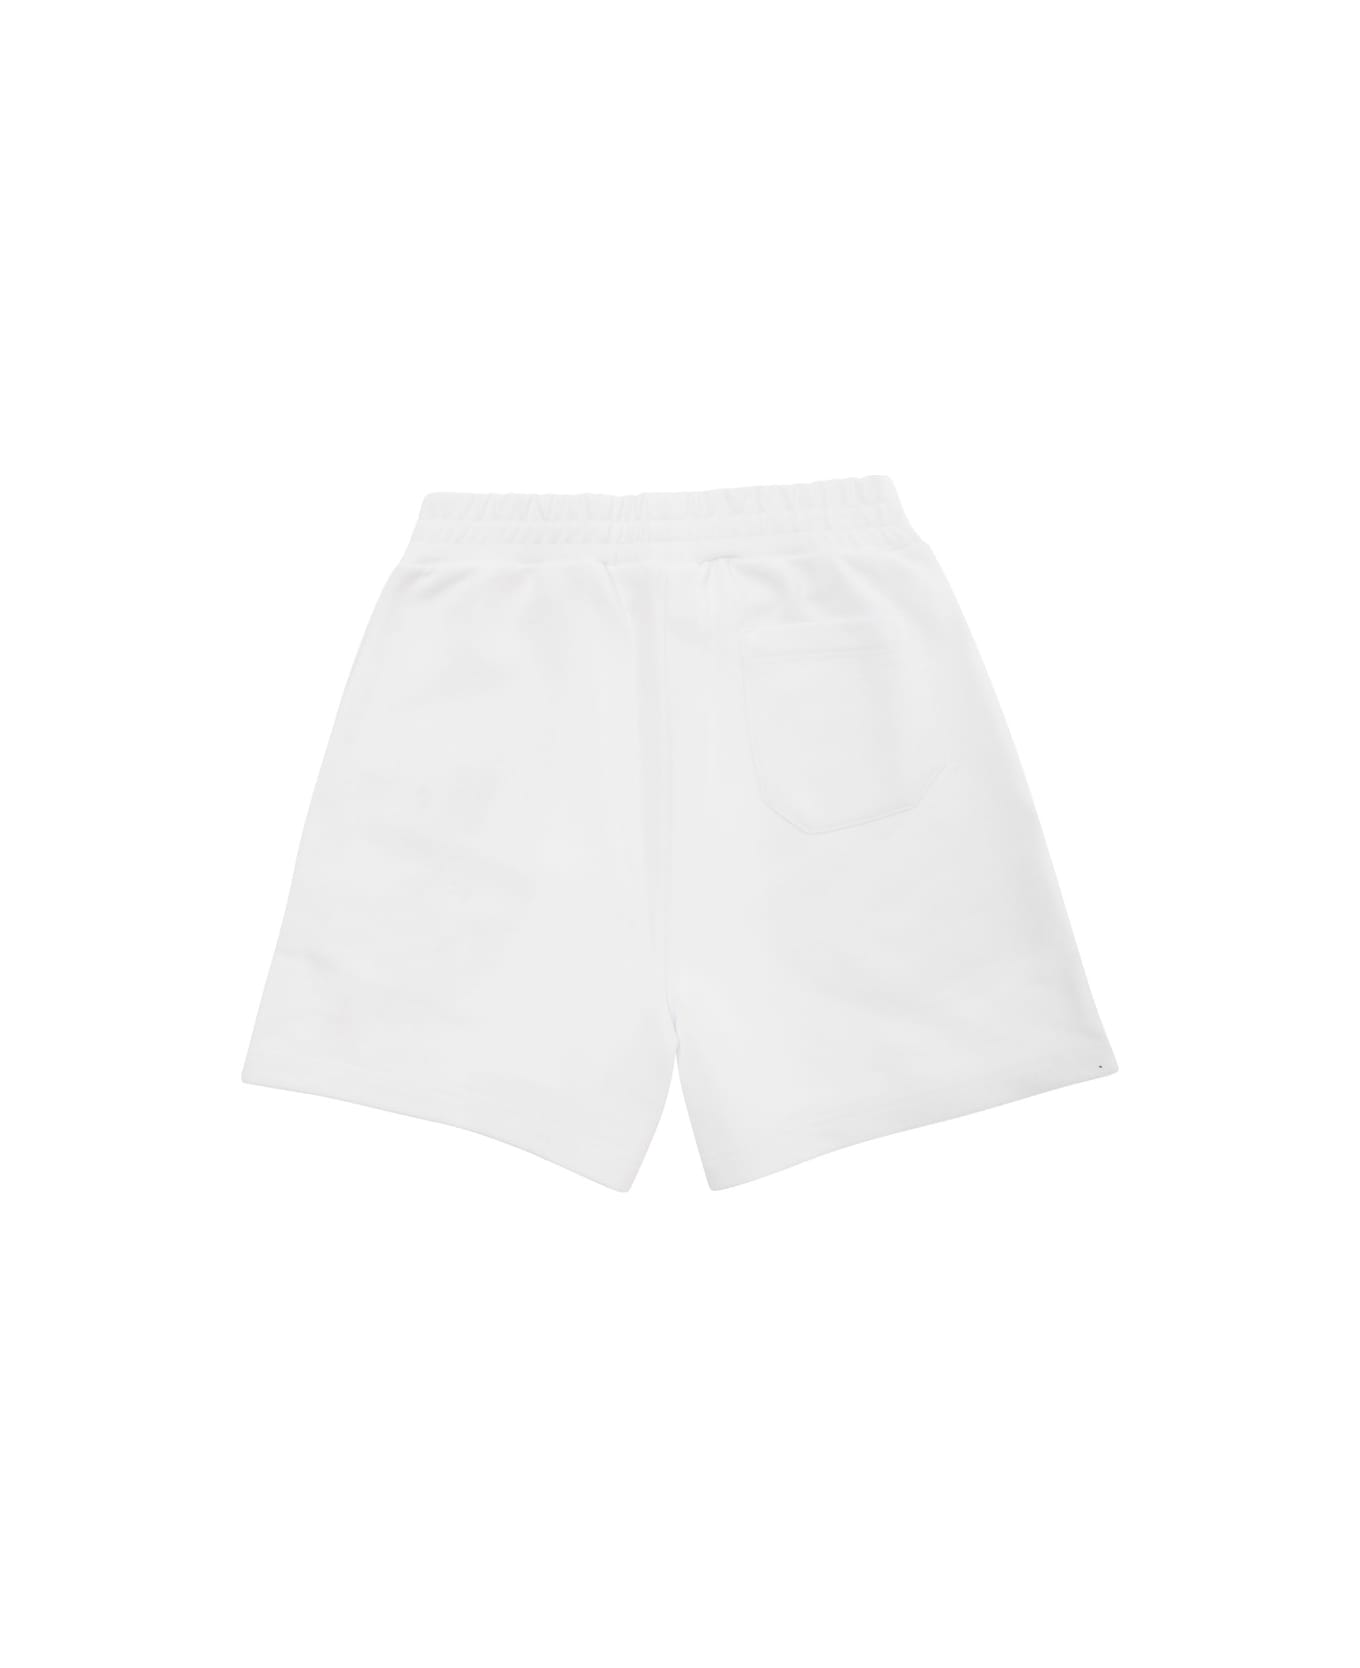 Golden Goose Star / Girl's Fleece Shorts / Small Star Glitter Printed Include Cod Gyp - White ボトムス